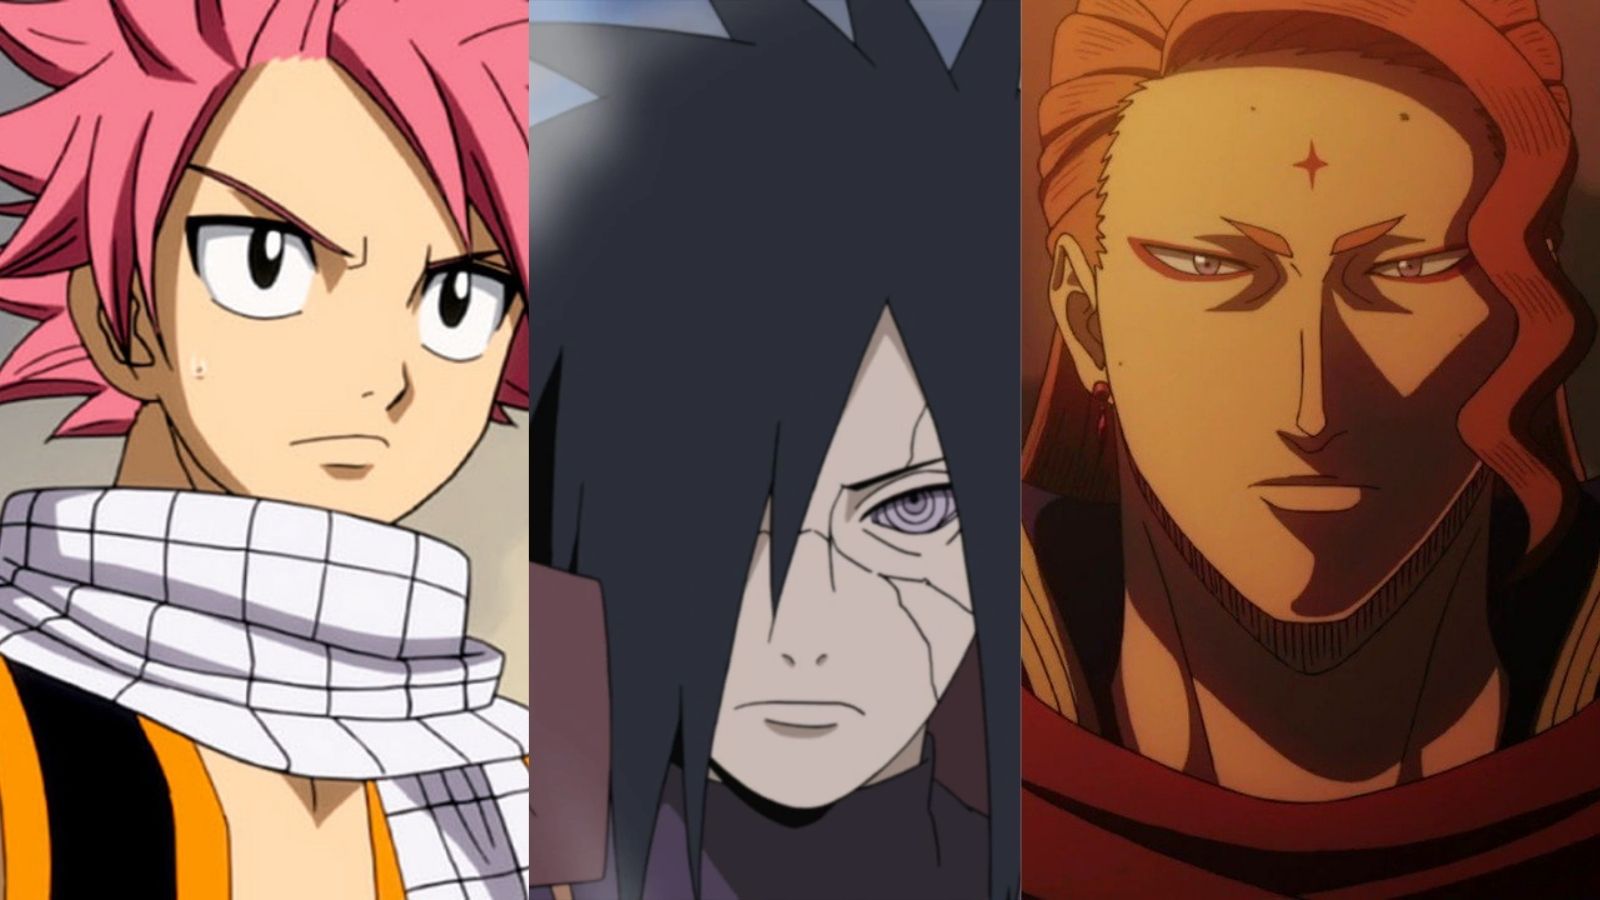 The 30 Most Powerful Anime Characters Ranked